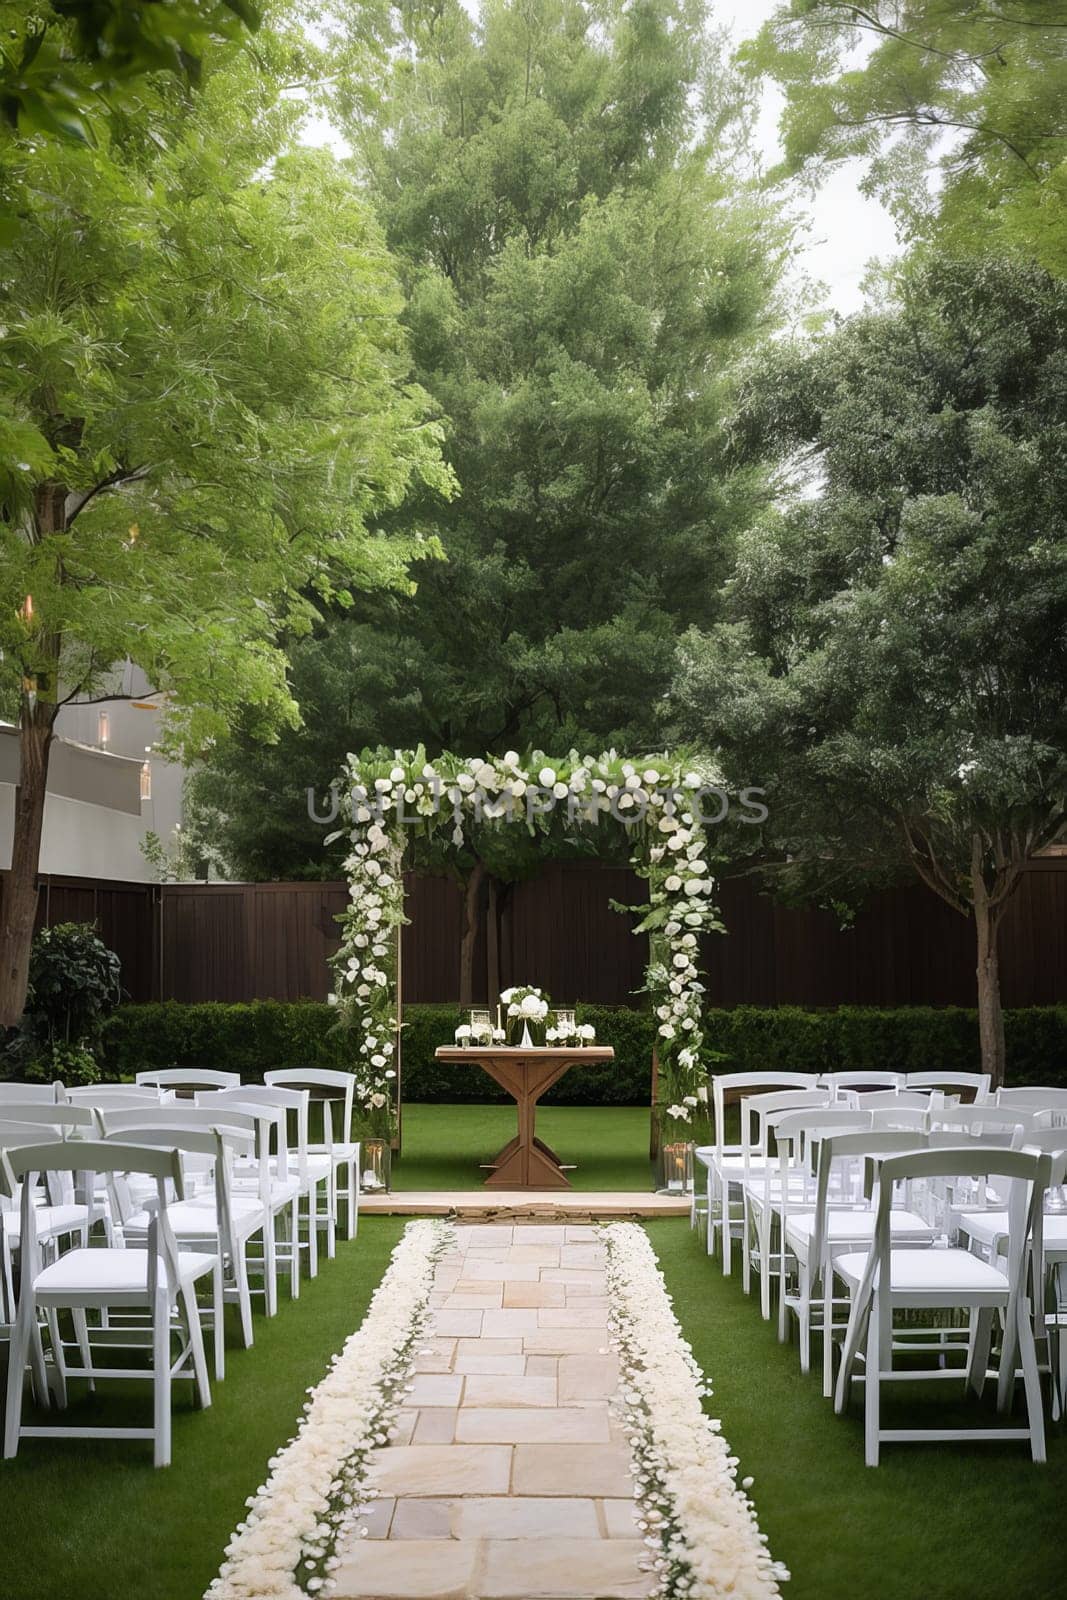 Minimalism and Passion: Outdoor Wedding in a Spacious Yard by Annu1tochka